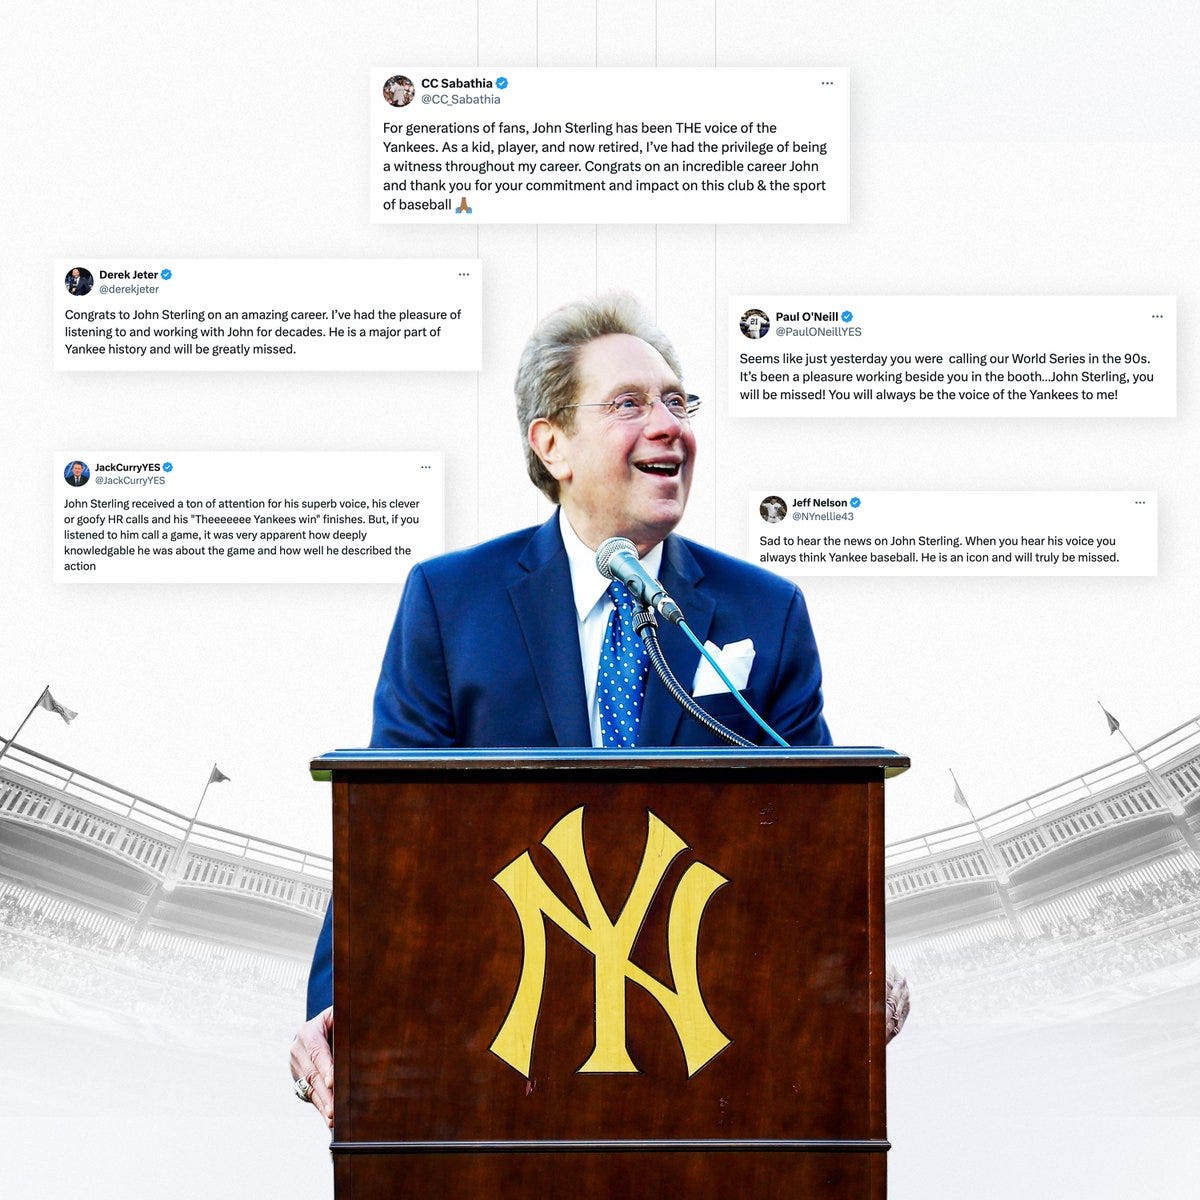 CC Sabathia: For generations of fans, John Sterling has been THE voice of the Yankees. As a kid, player, and now retired, I’ve had the privilege of being a witness throughout my career. Congrats on an incredible career John and thank you for your commitment and impact on this club & the sport of baseball
Derek Jeter: Congrats to John Sterling on an amazing career. I’ve had the pleasure of listening to and working with John for decades. He is a major part of Yankee history and will be greatly missed.
Paul O'Neill: Seems like just yesterday you were calling our World Series in the 90s. It’s been a pleasure working beside you in the booth…John Sterling, you will be missed! You will always be the voice of the Yankees to me!

Jeff Nelson: Sad to hear the news on John Sterling. When you hear his voice you always think Yankee baseball. He is an icon and will truly be missed.

